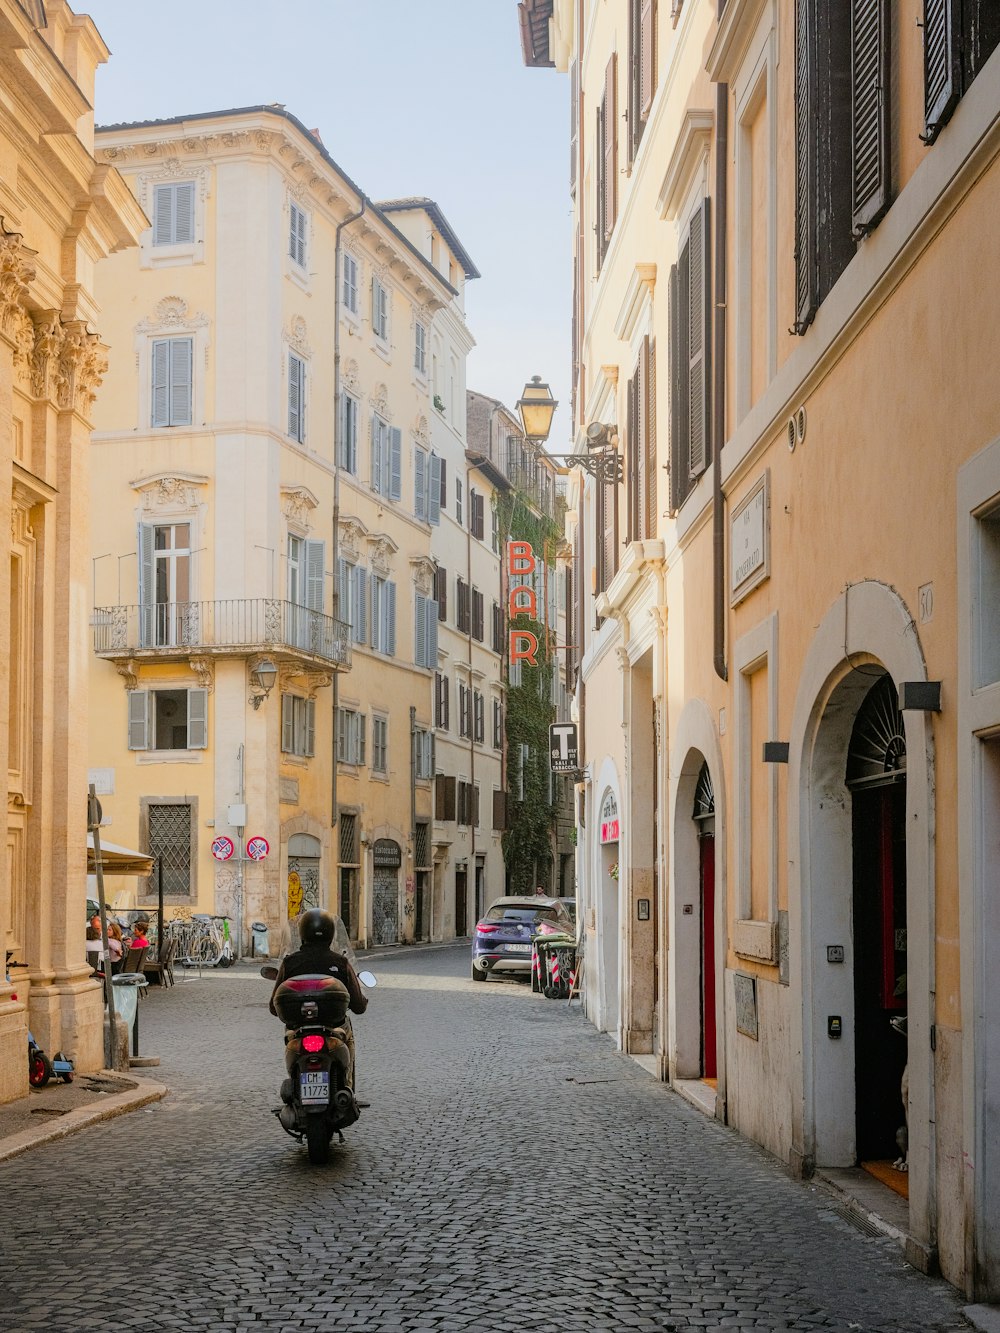 a motorcycle is parked on a cobblestone street